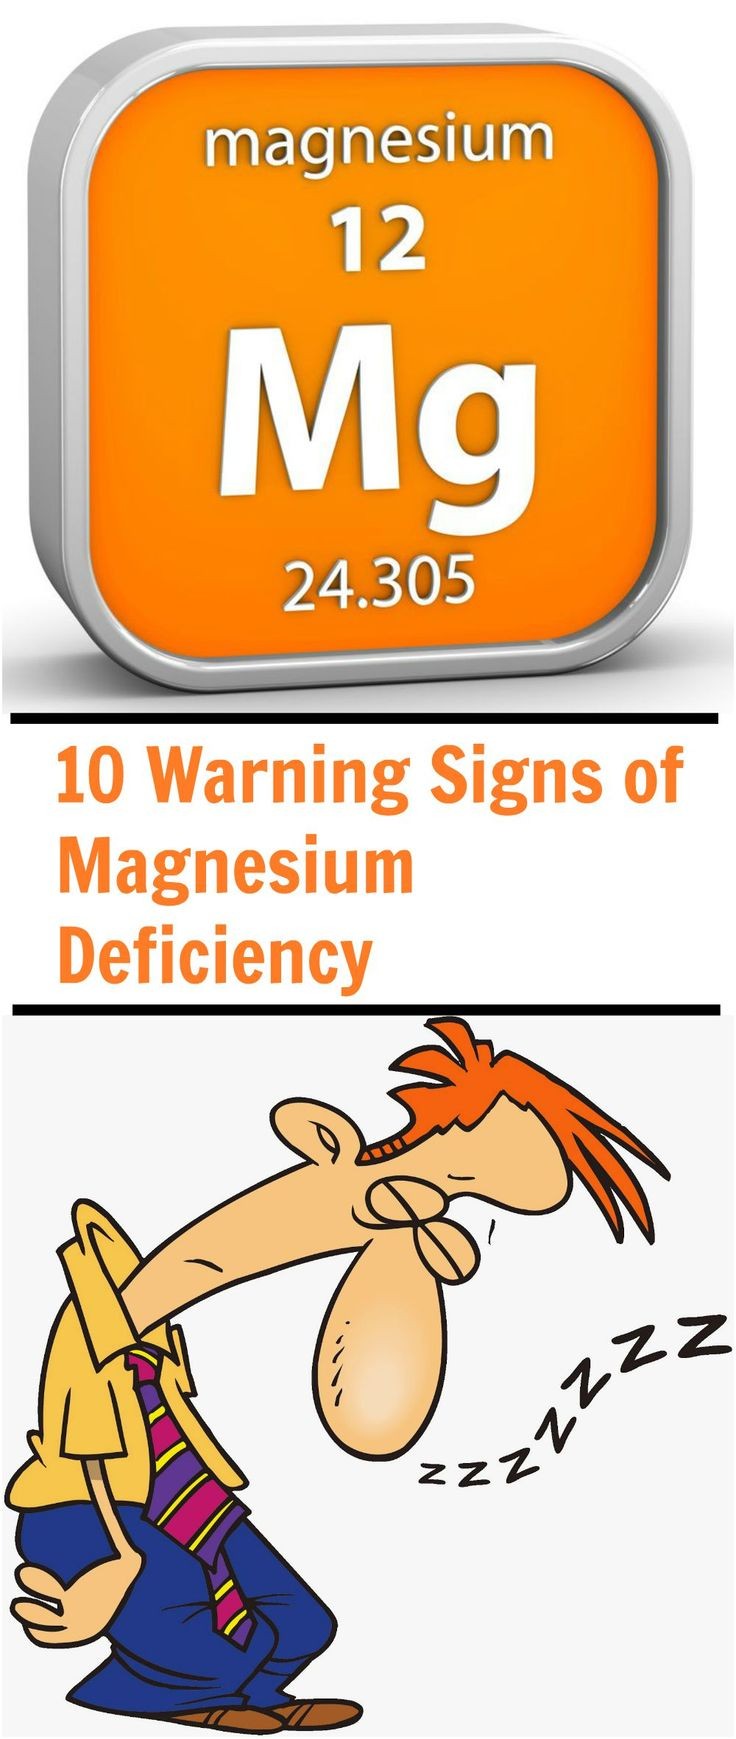 Magnesium deficiency is known in research circles...